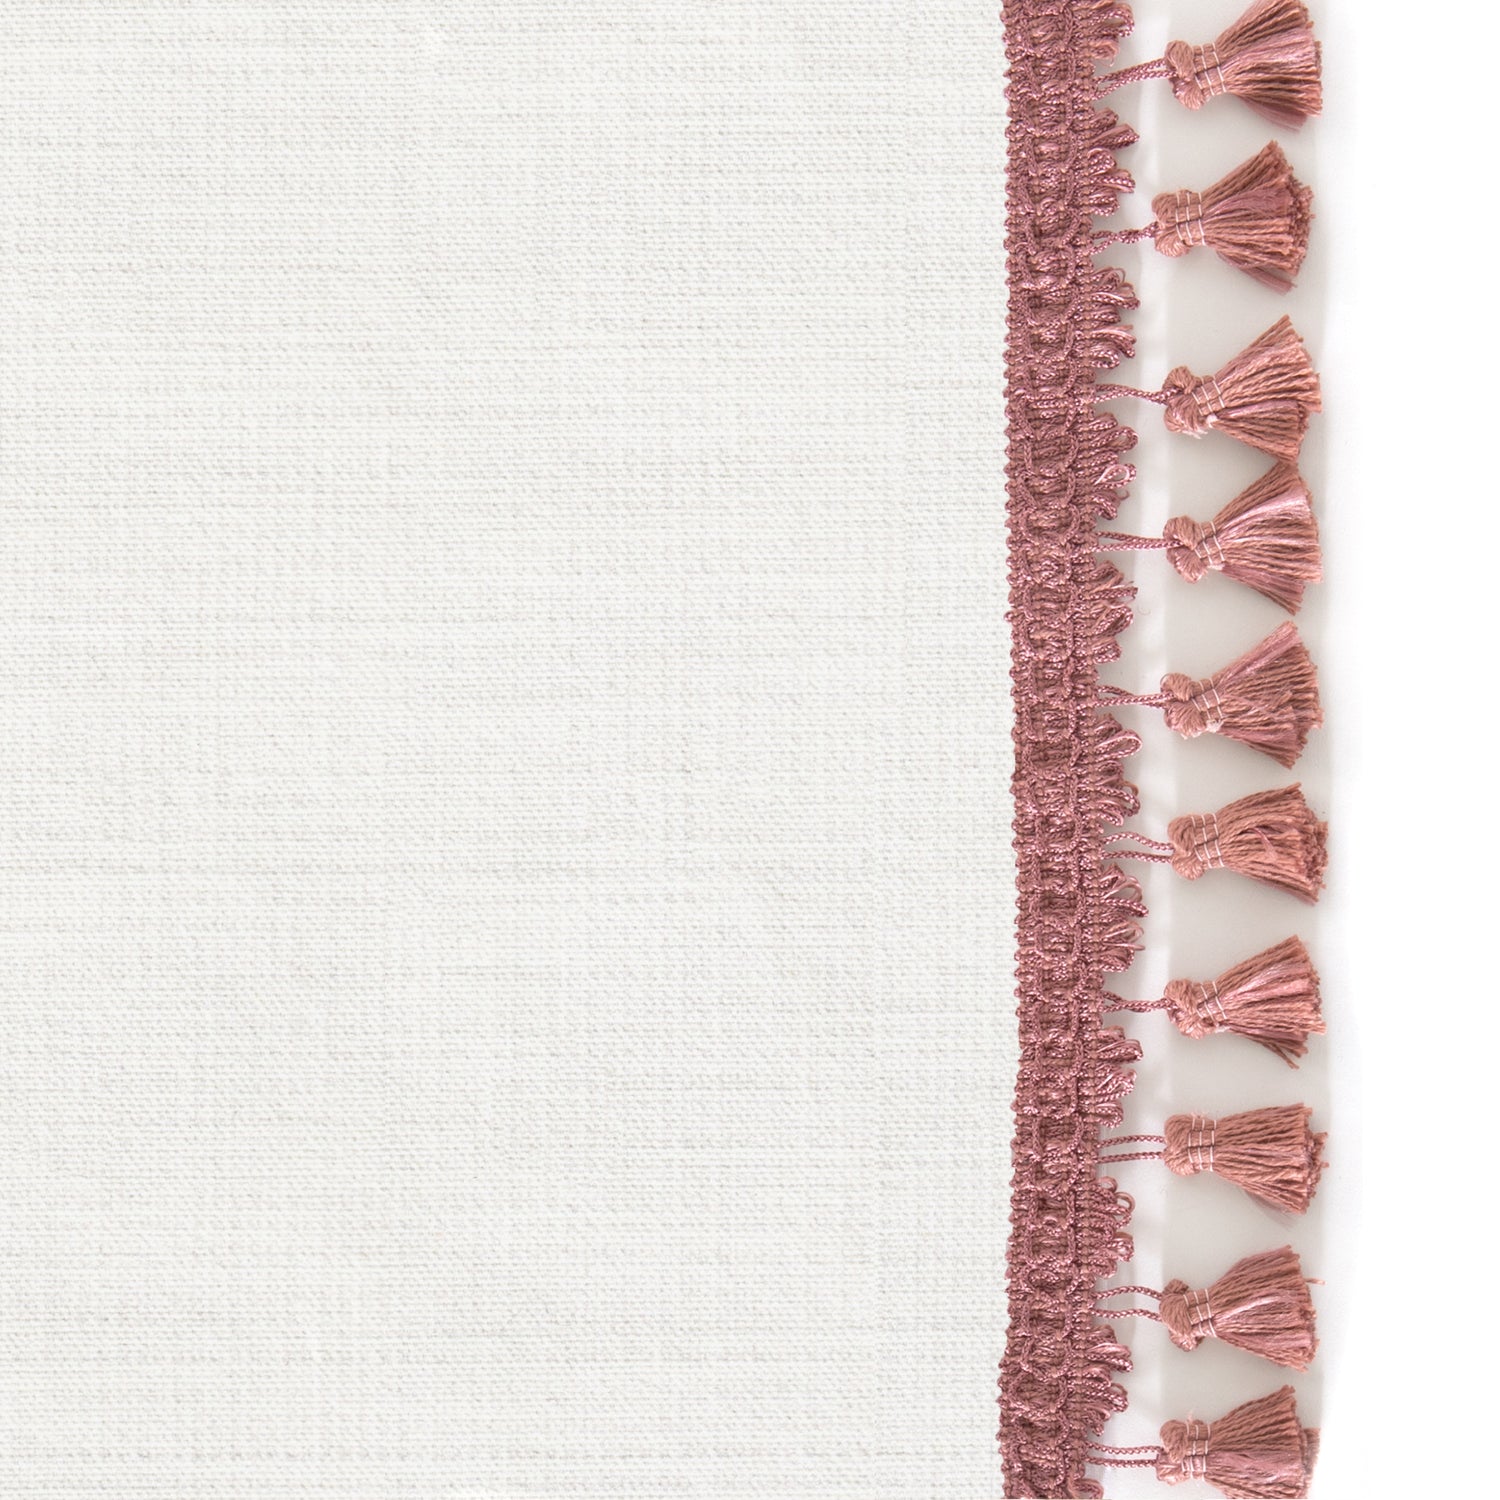 Upclose picture of Snow custom Whiteshower curtain with dusty rose tassel trim